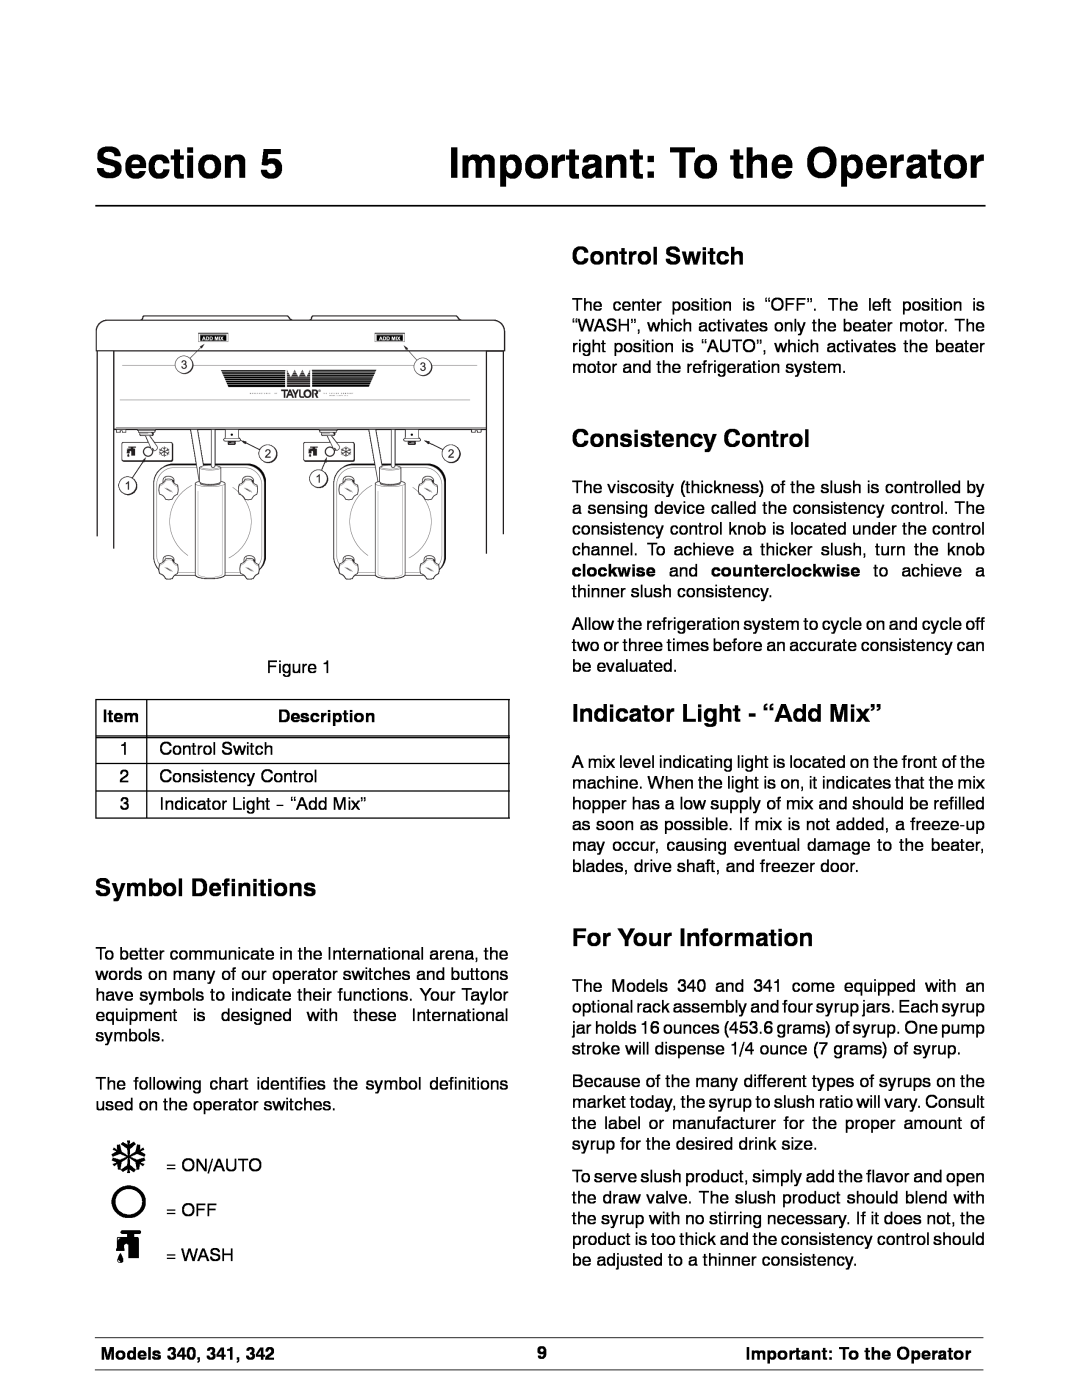 Taylor 342 Important To the Operator, Symbol Definitions, Control Switch, Consistency Control, Indicator Light - “Add Mix” 